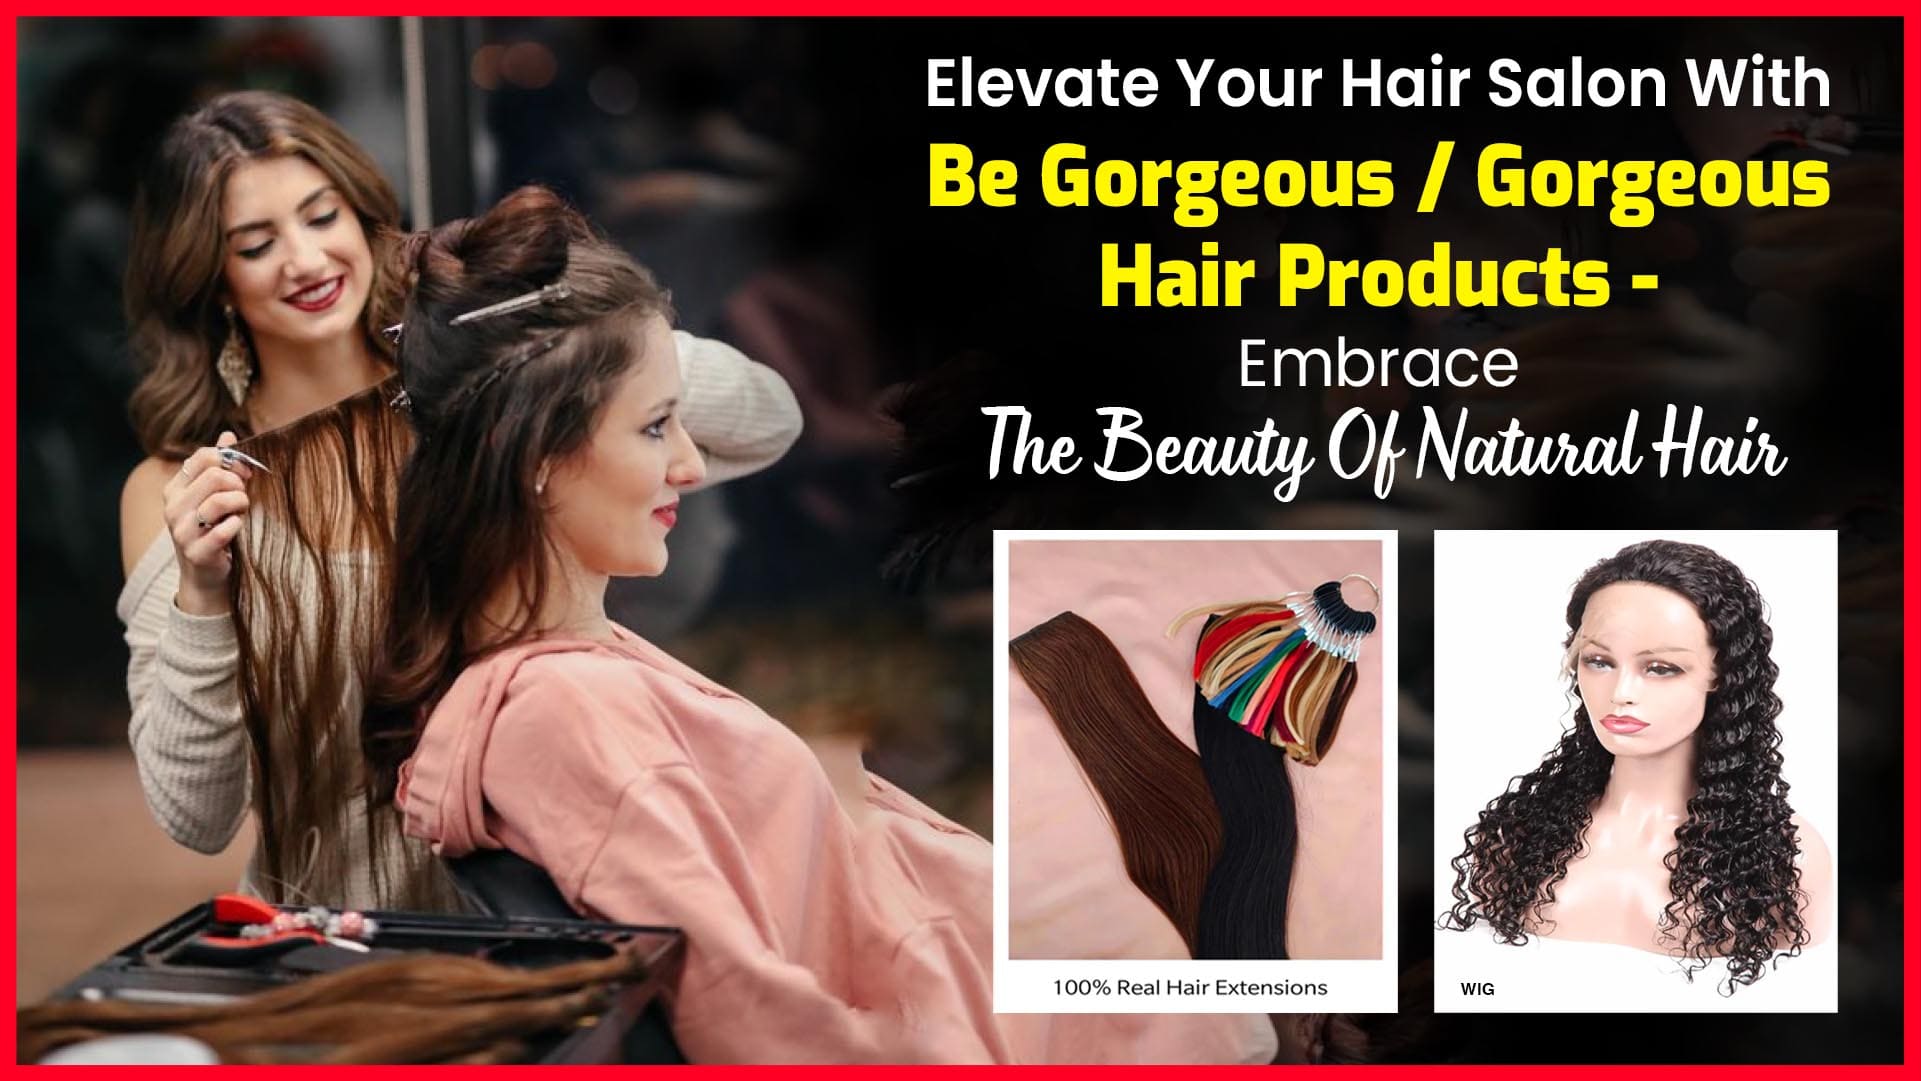 Elevate your hair salon with Be Gorgeous Hair Products